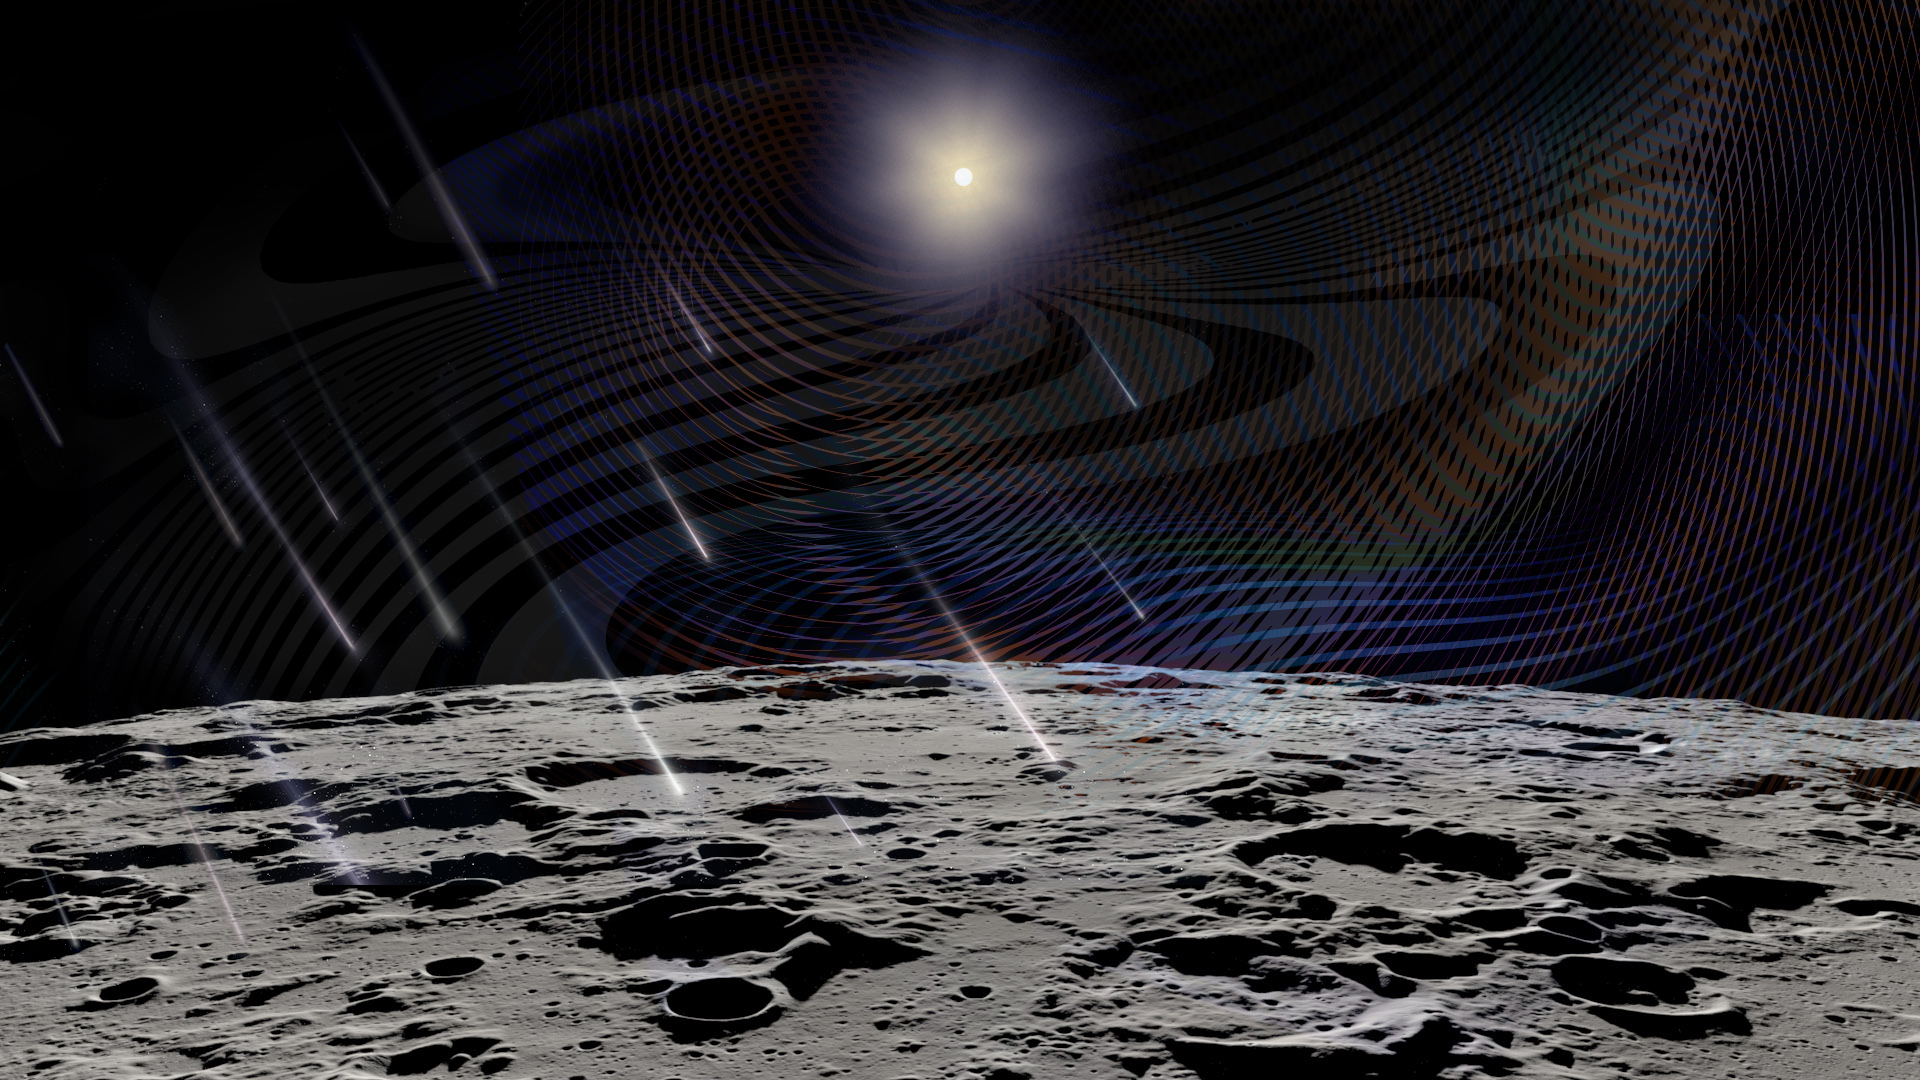 slide 2 - Artist rendering of meteorites raining down the surface of the Moon, and the Sun in the distant sky.